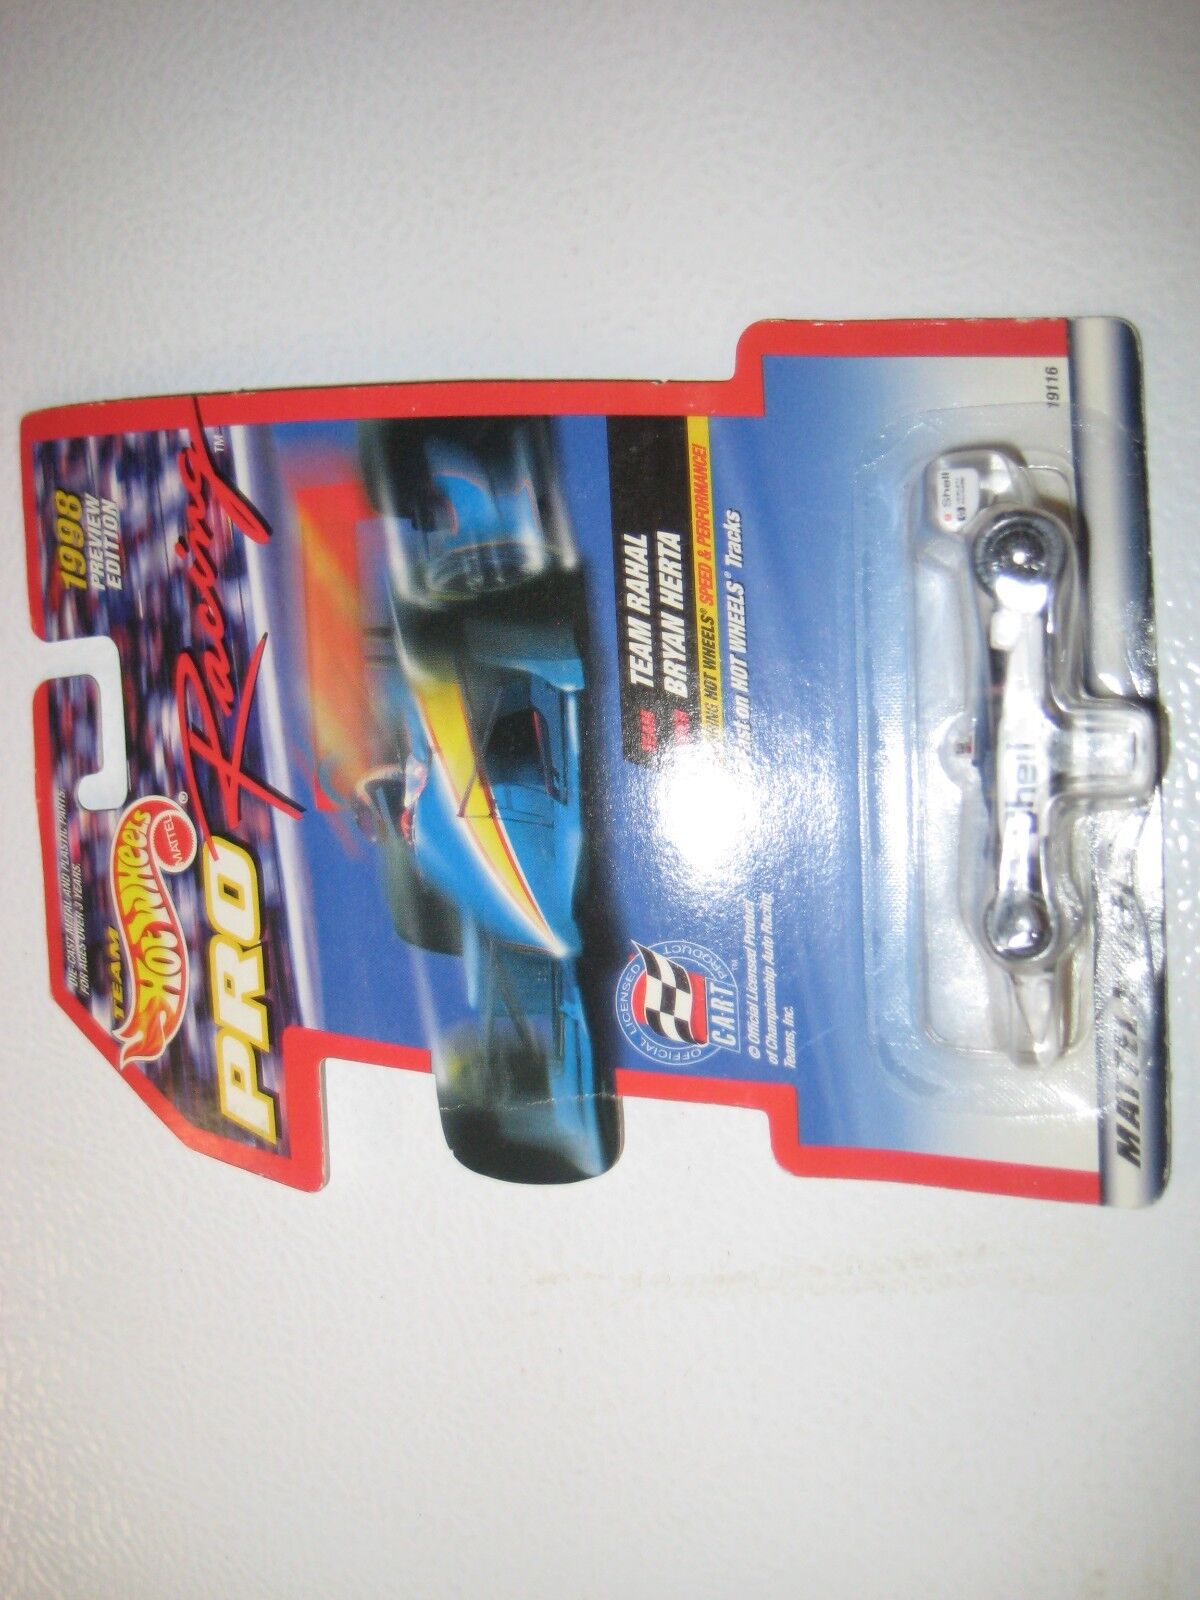 Hot Wheels,Pro Racing,6 from 1997,and 1 from 1998. In package. Hot Wheels